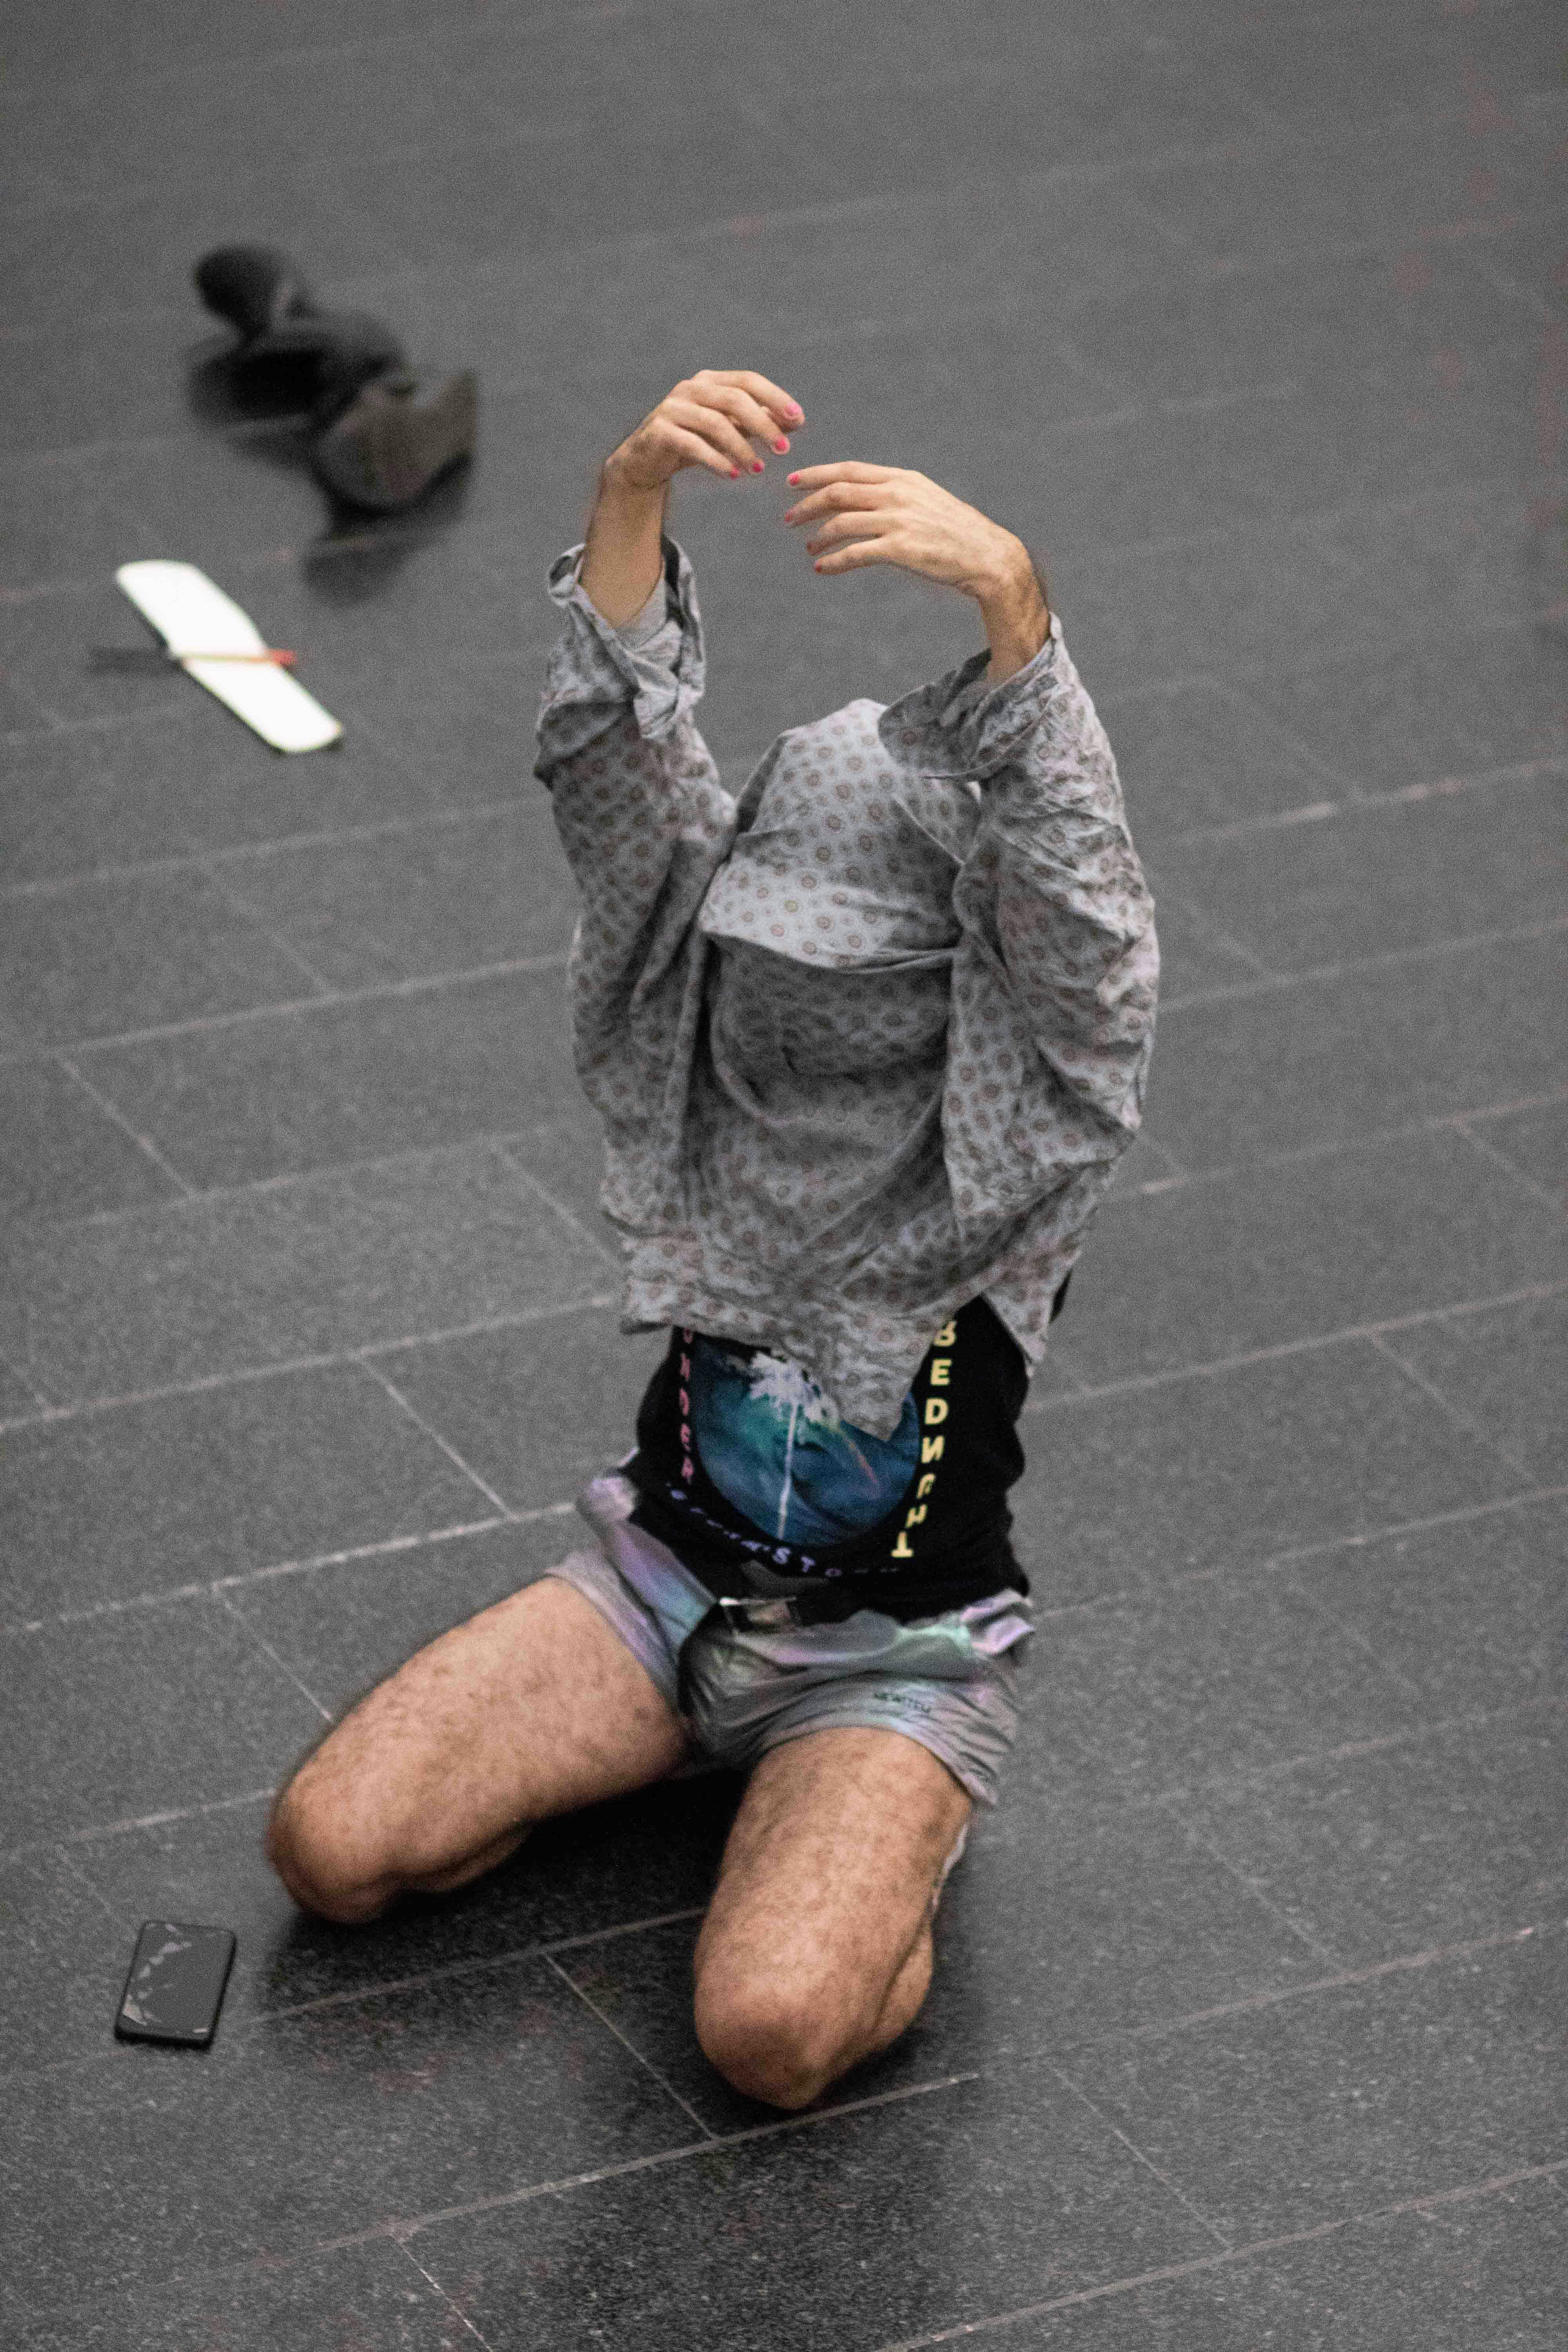 Daniele Ninarello kneeled on the floor; his arms are raised upward. He is wearing a shirt that he lifts to cover his face and head.